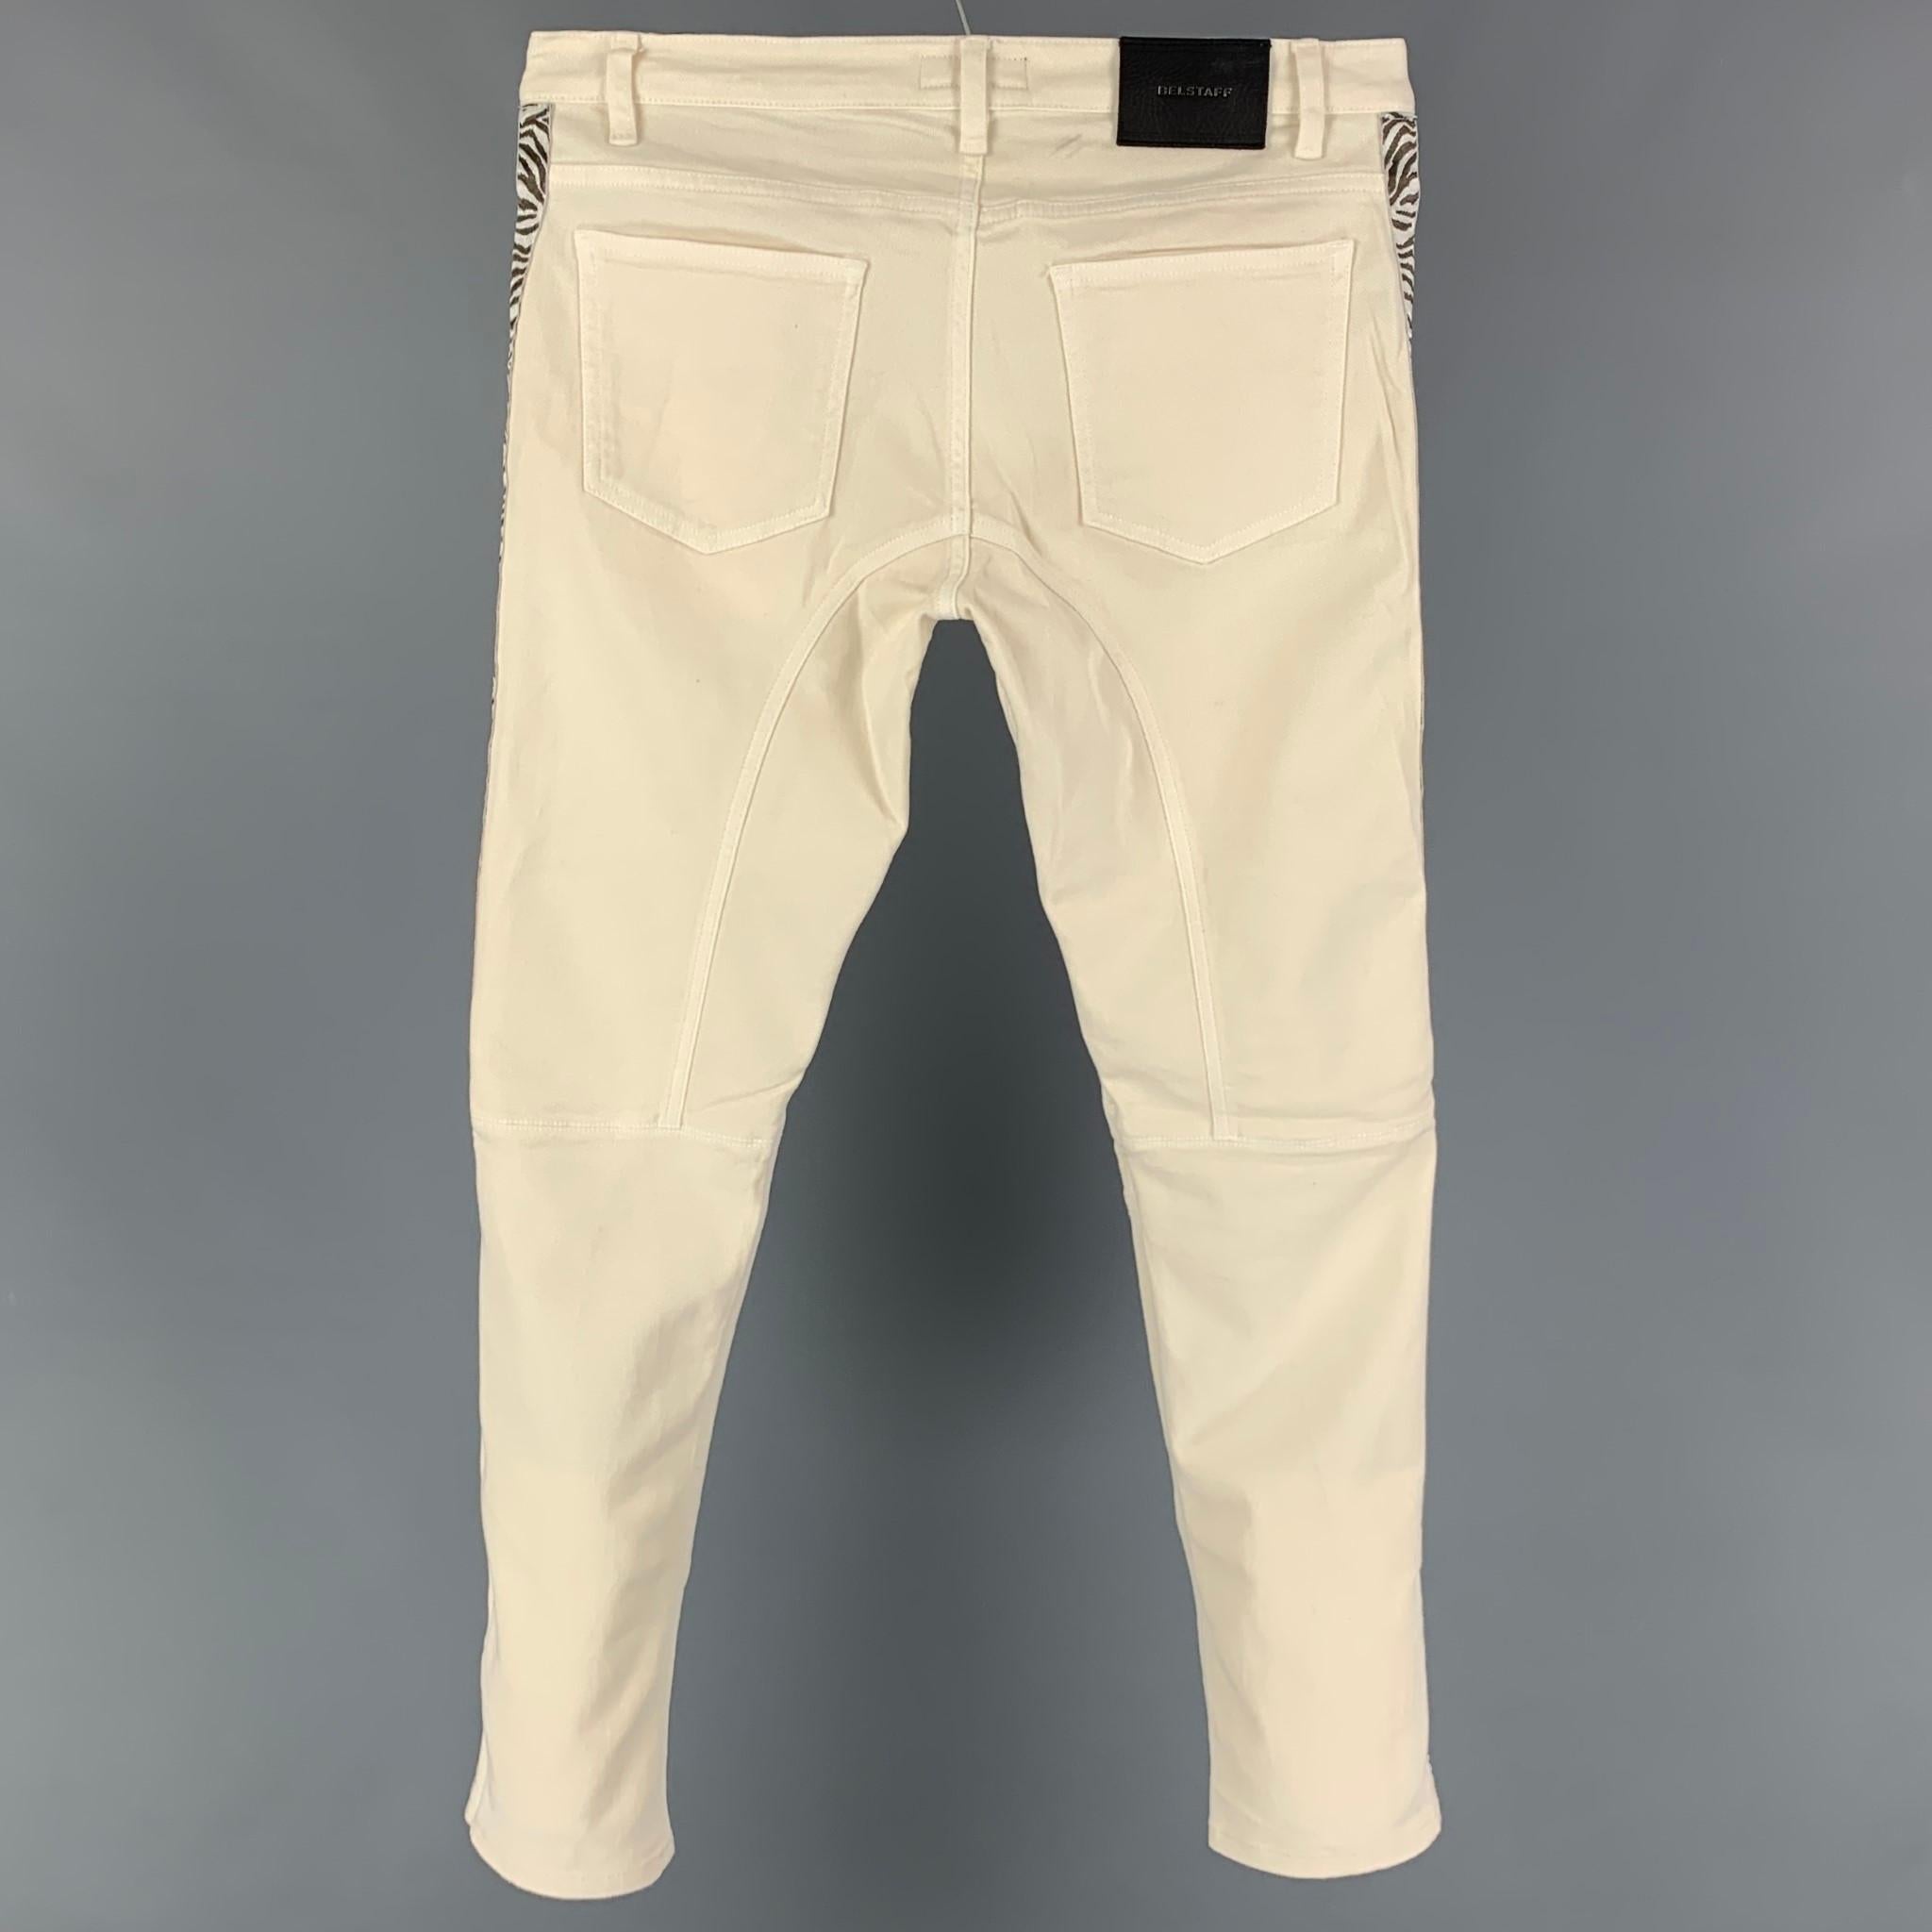 BELSTAFF jeans comes in a cream & brown cotton blend featuring a slim fit, low rise, animal print trim, ribbed panel, and a zip fly closure. 

Very Good Pre-Owned Condition.
Marked: 30/33

Measurements:

Waist: 30 in.
Rise: 9.5 in.
Inseam: 30 in. 